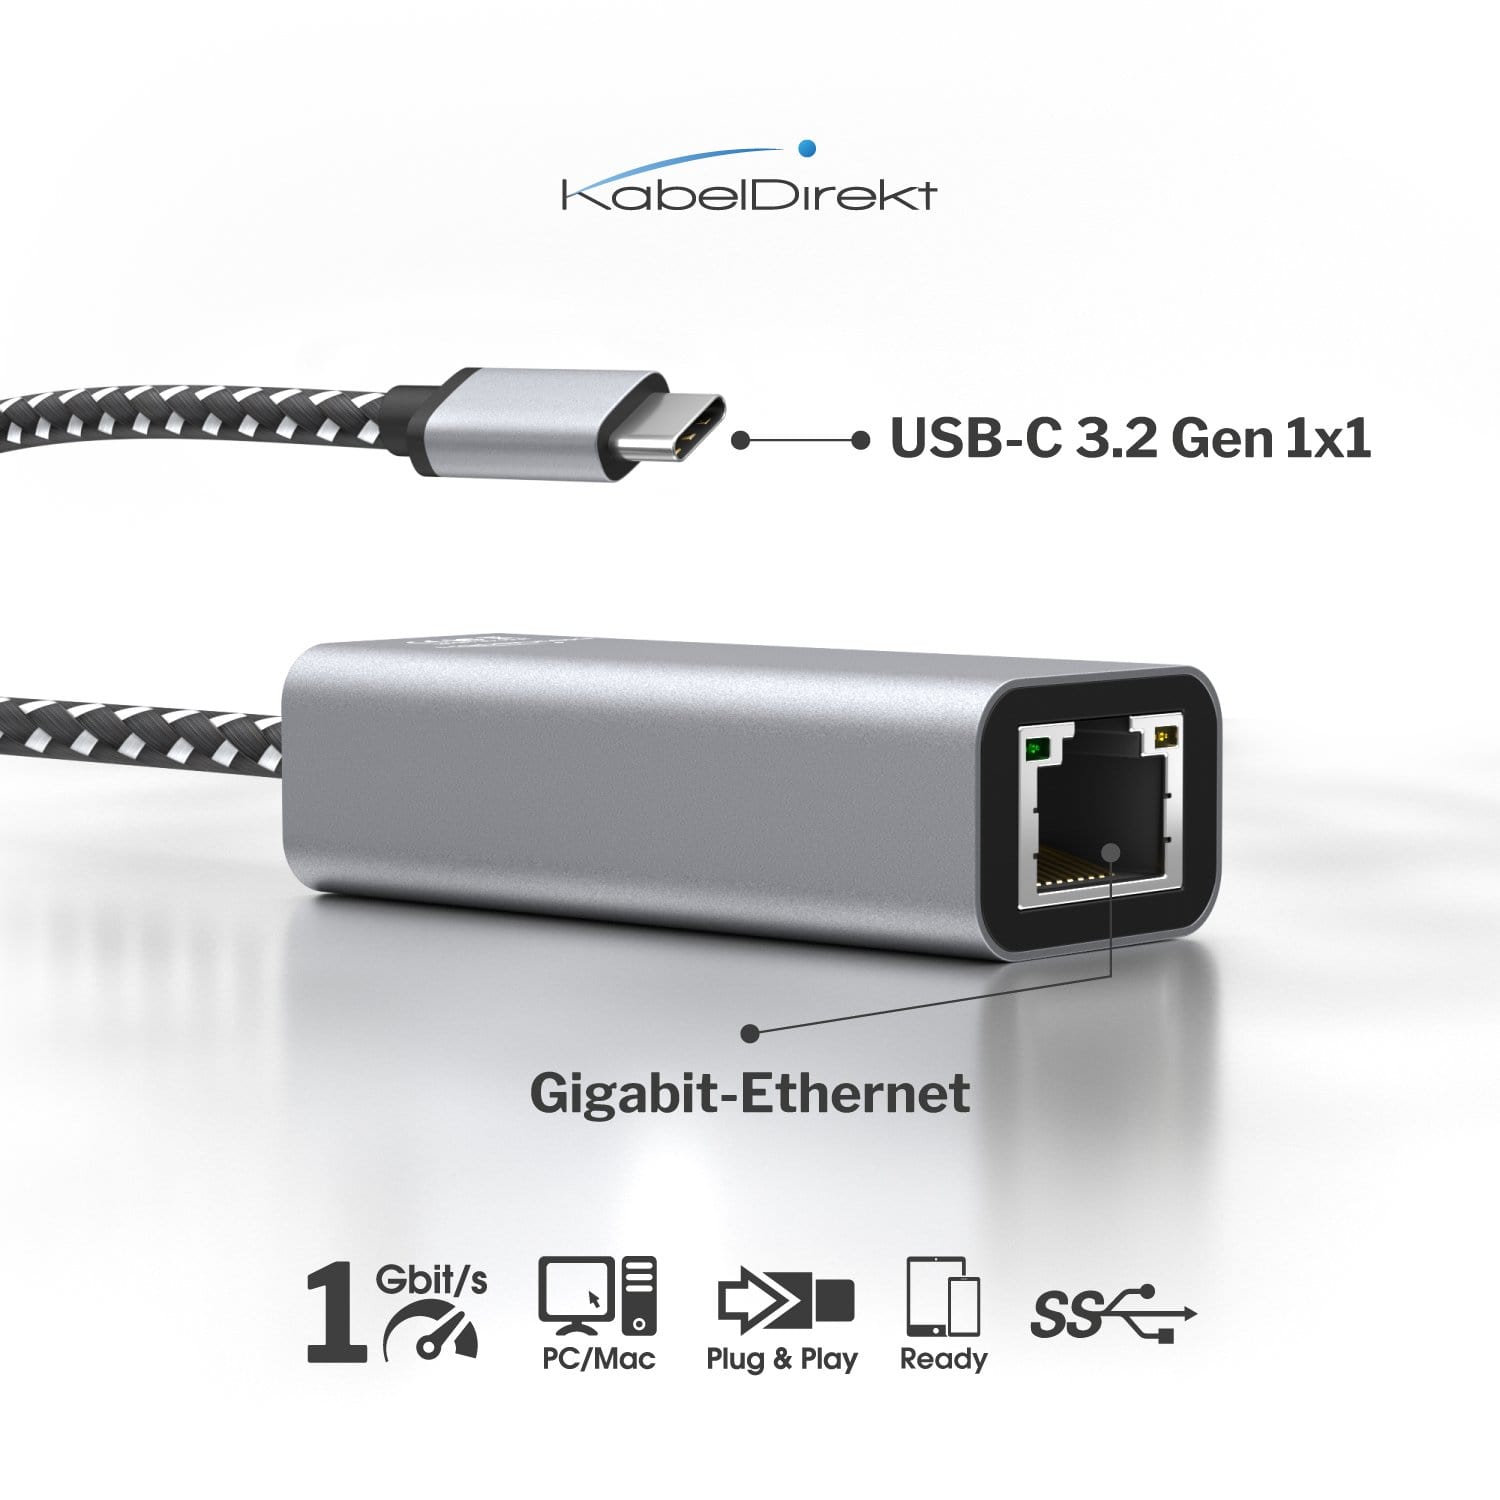 USB-C to Ethernet adapter